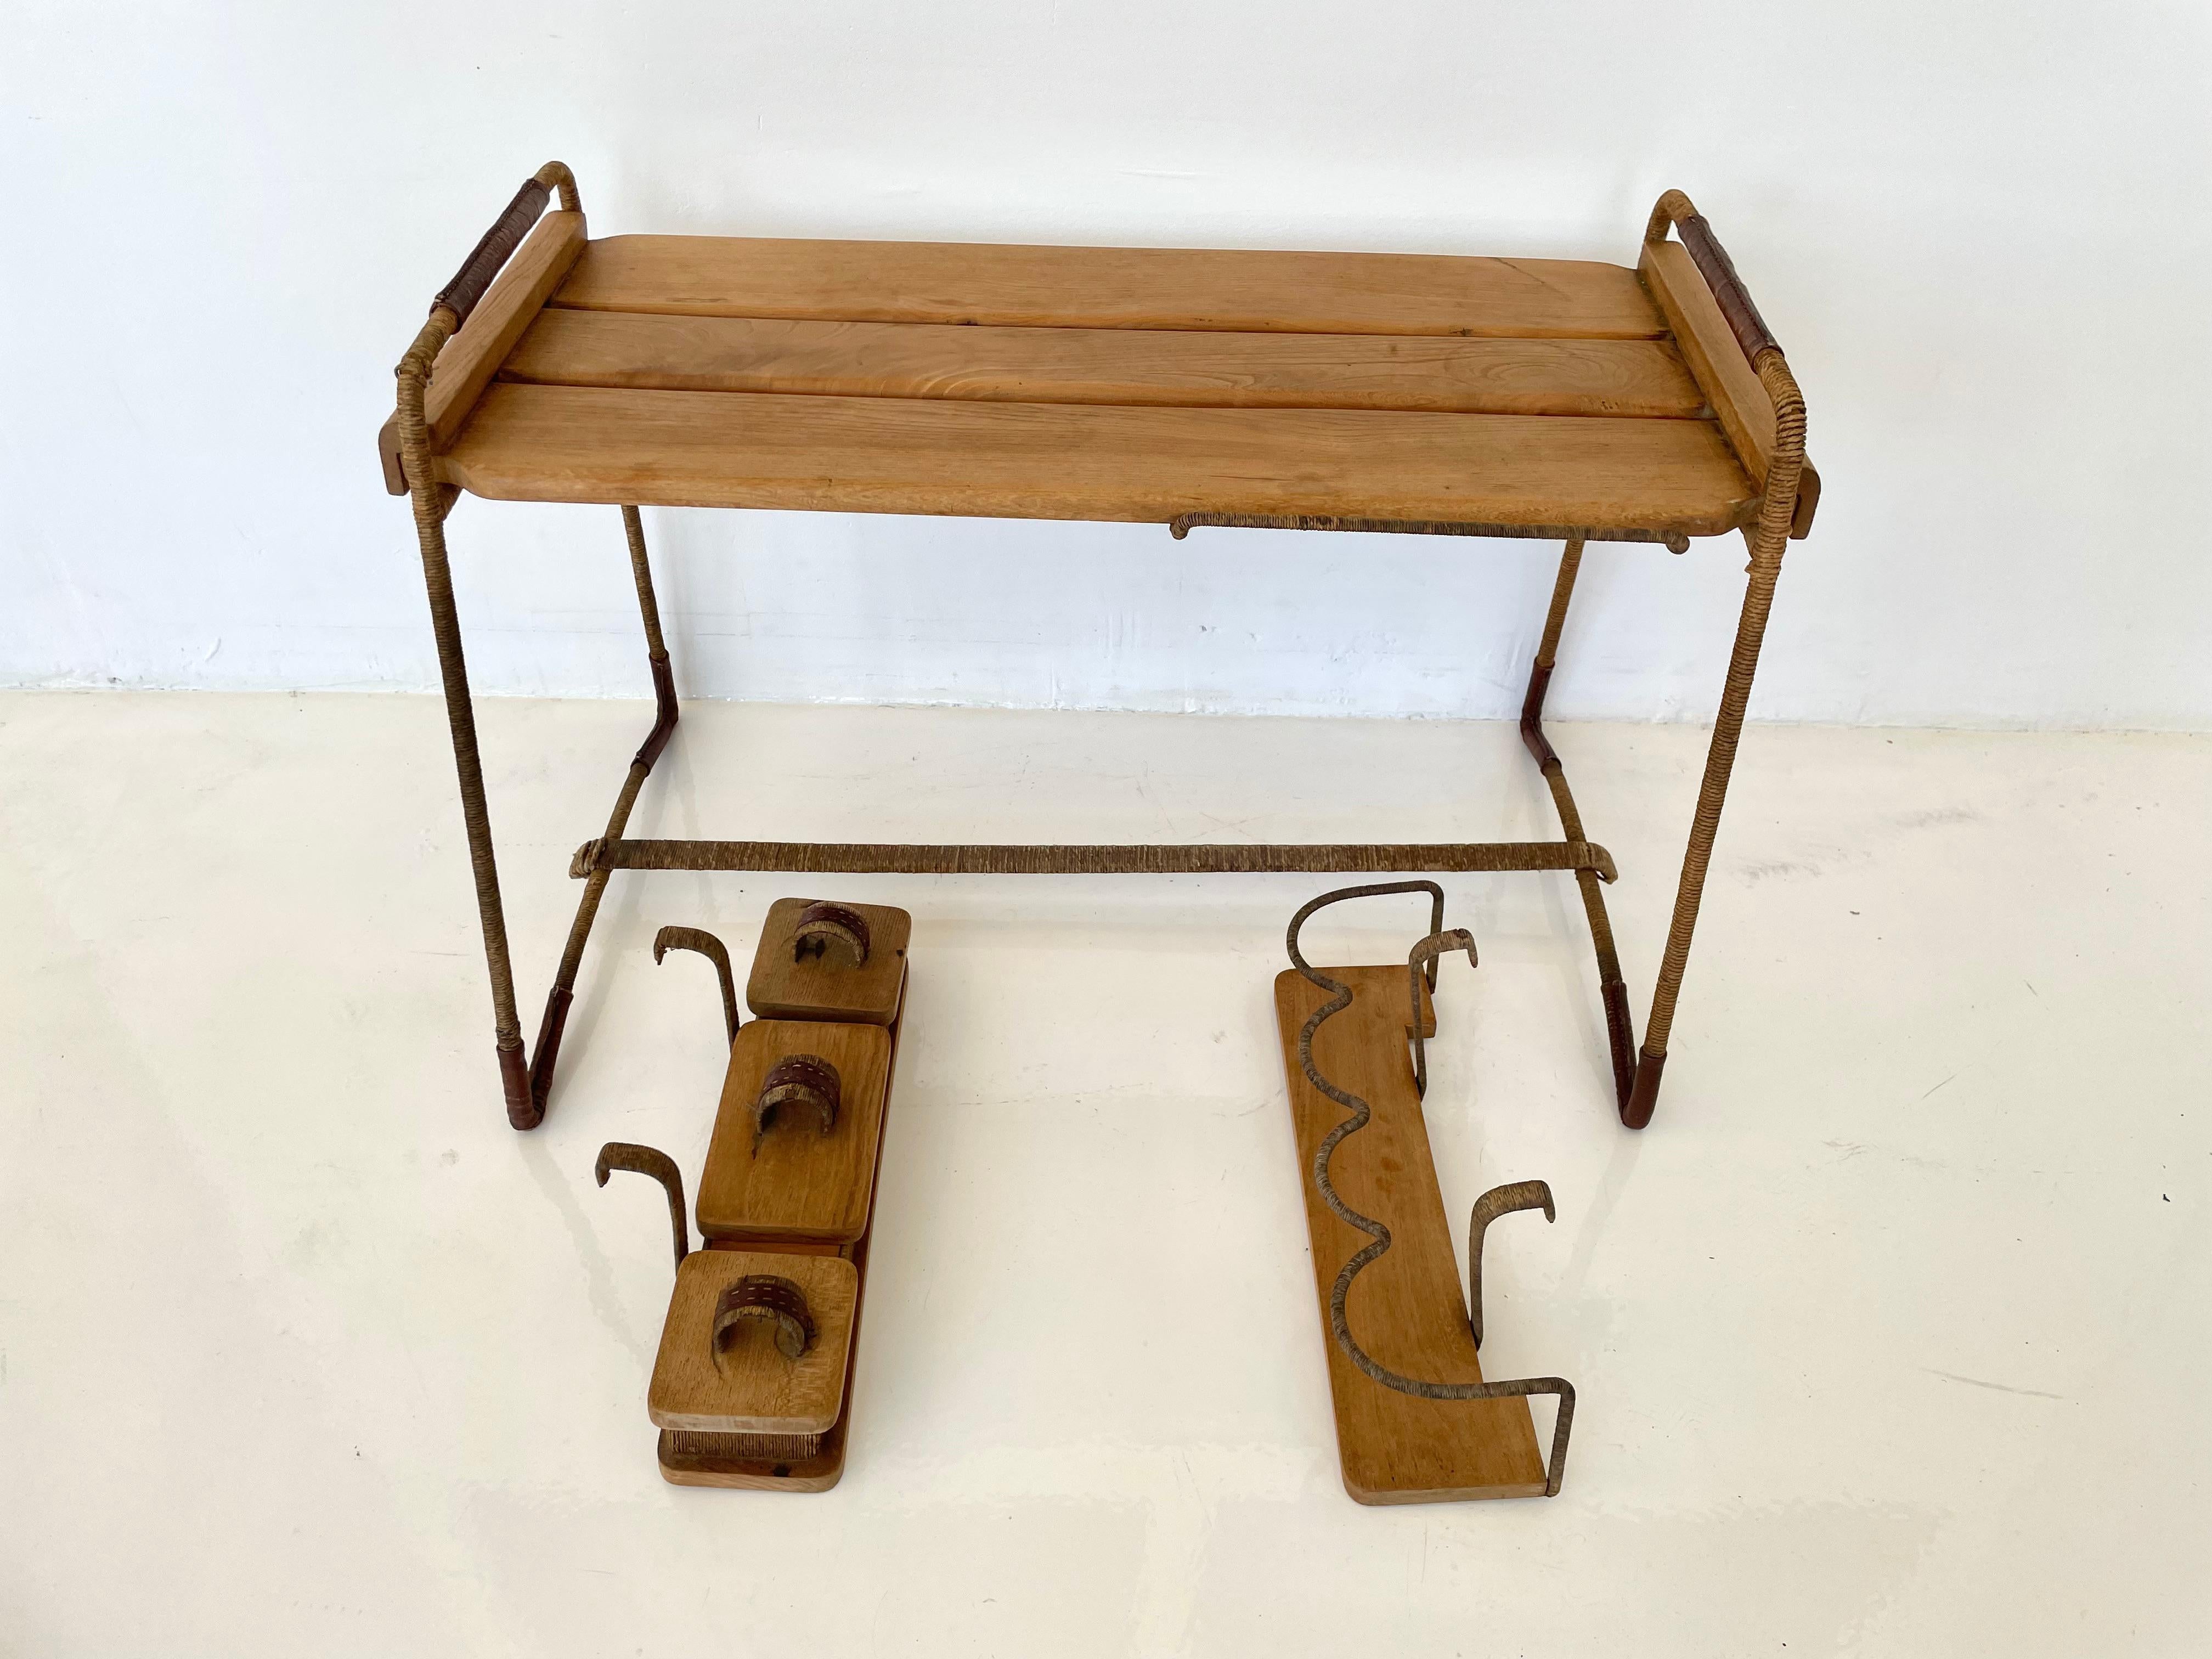 Handsome serving cart by French designer Jacques Adnet. Leather and twine wrapped frame with two removable attachments on the sides. Leather wrapped corners with signature Adnet stitching. One side has a drink caddy that holds three bottles. The